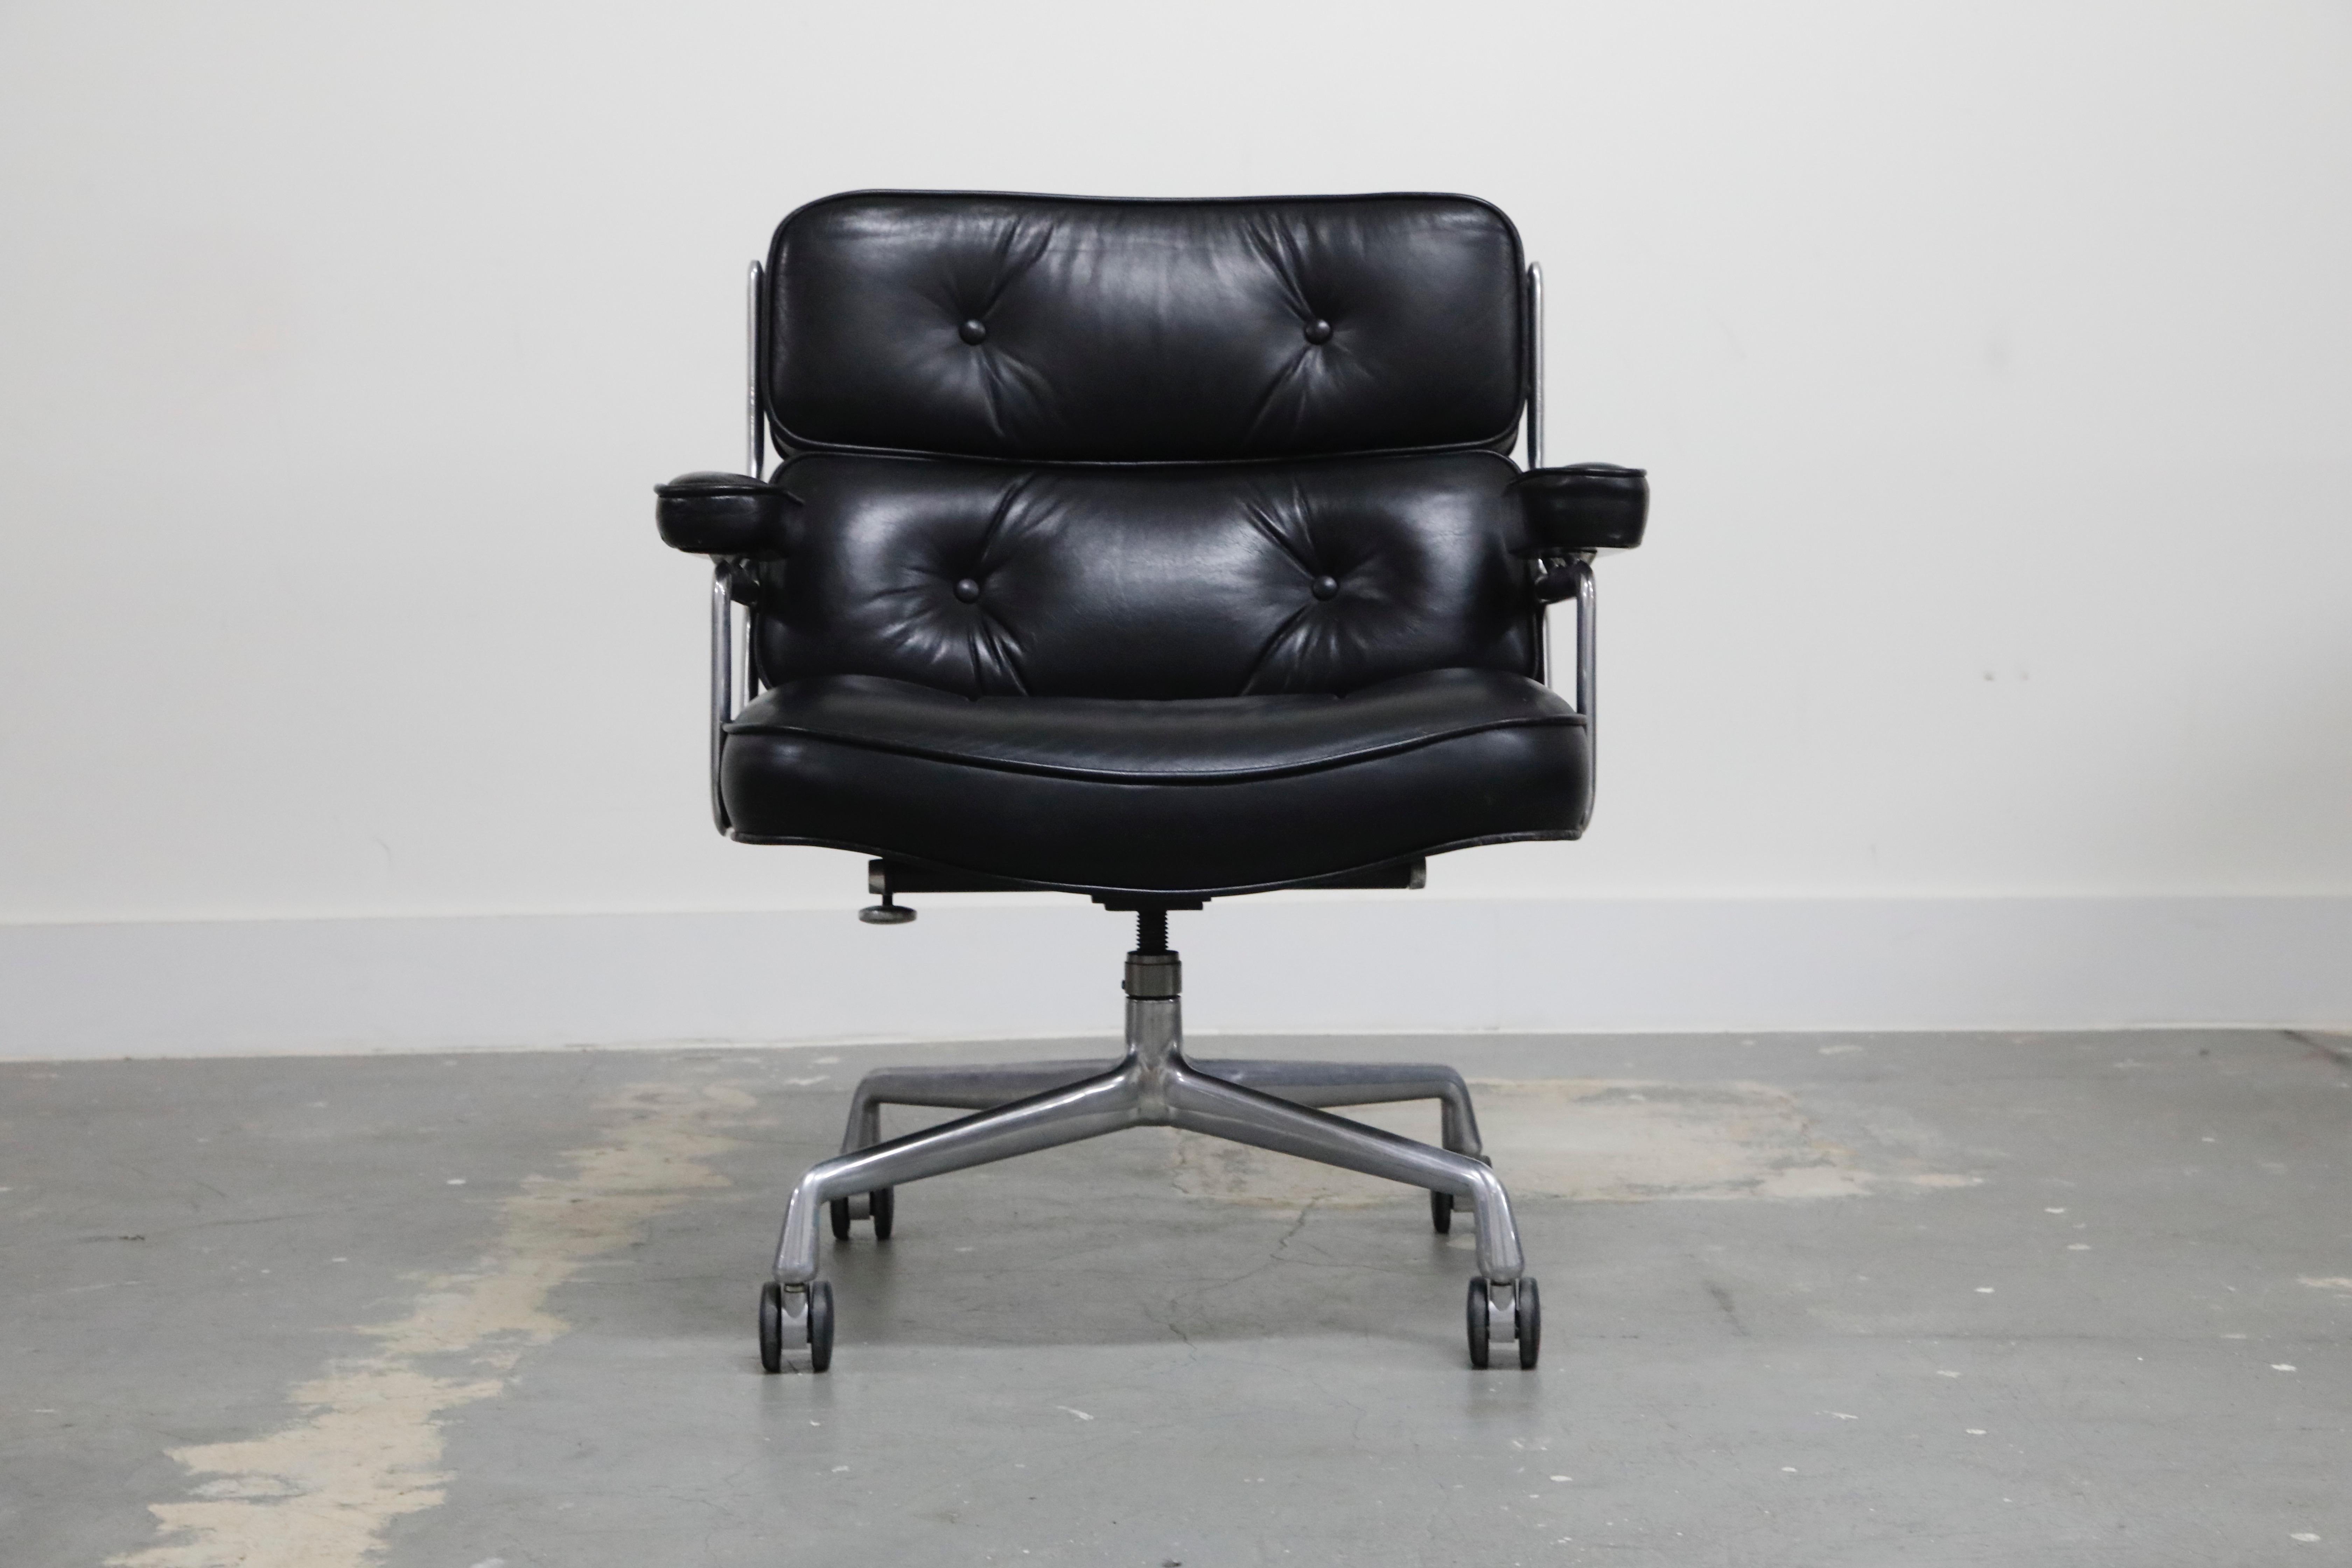 The ultimate desk chair and timeless classic by Charles and Ray Eames for Herman Miller. This Time Life 'Lobby' chair is wider than the standard Time Life chair and was the original design for the Time Life lobby lounge hence the chair's name. This